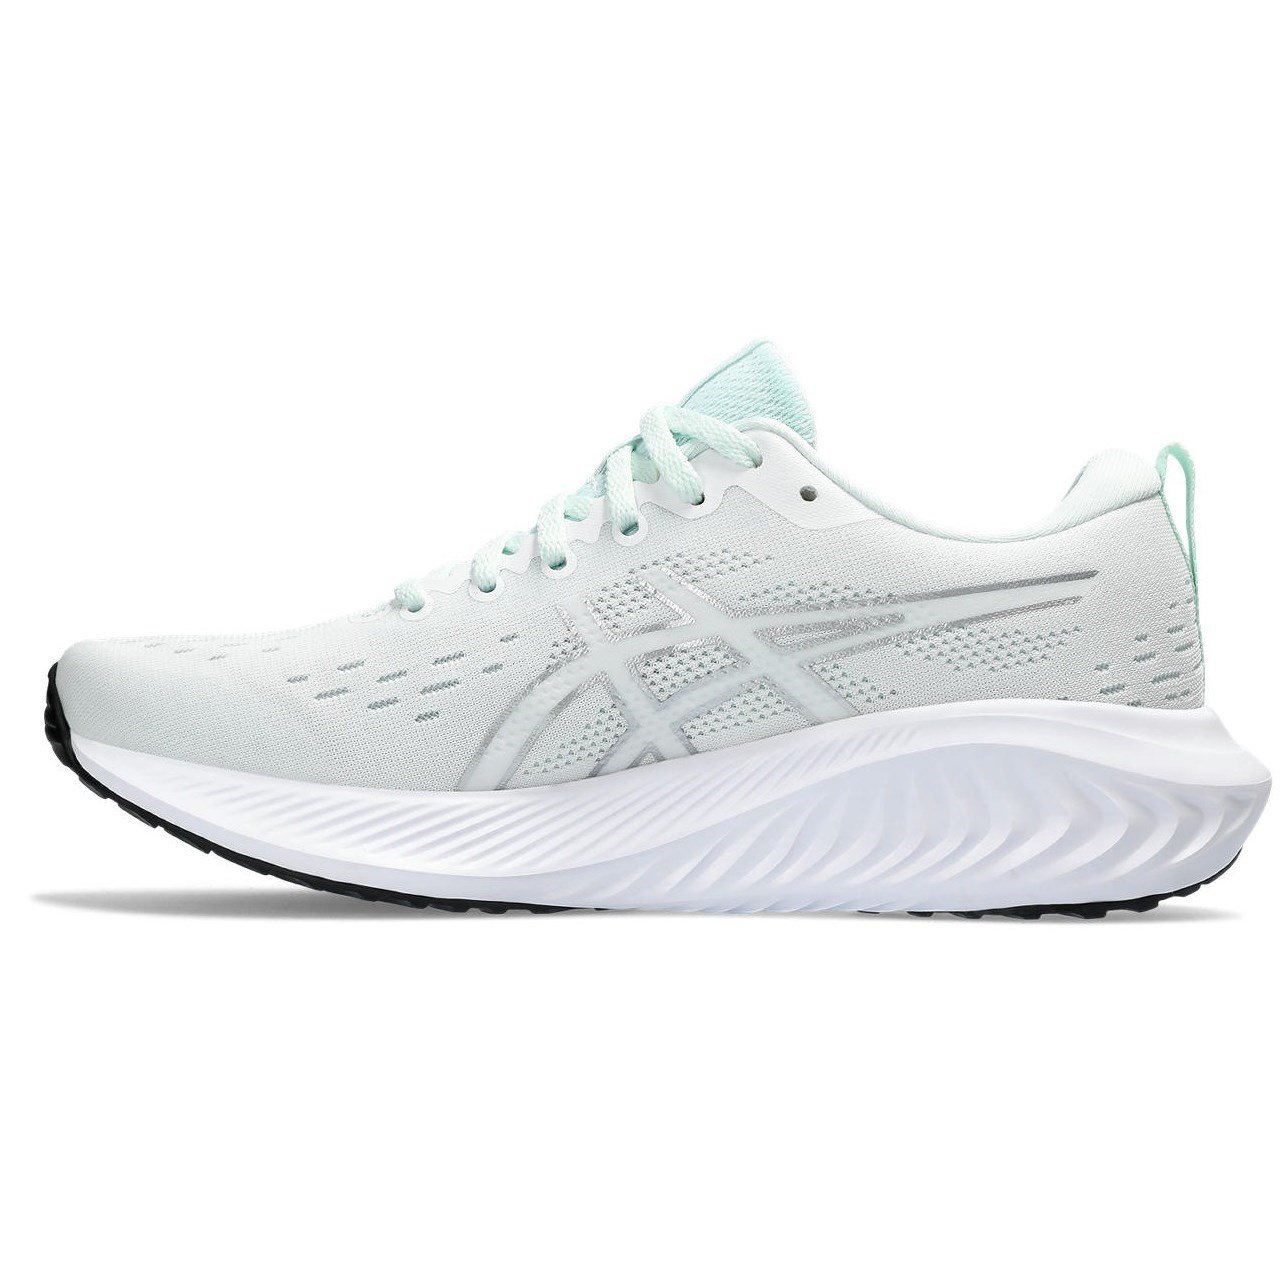 Asics Gel Excite 10 - Womens Running Shoes - White/Pure Silver | Sportitude